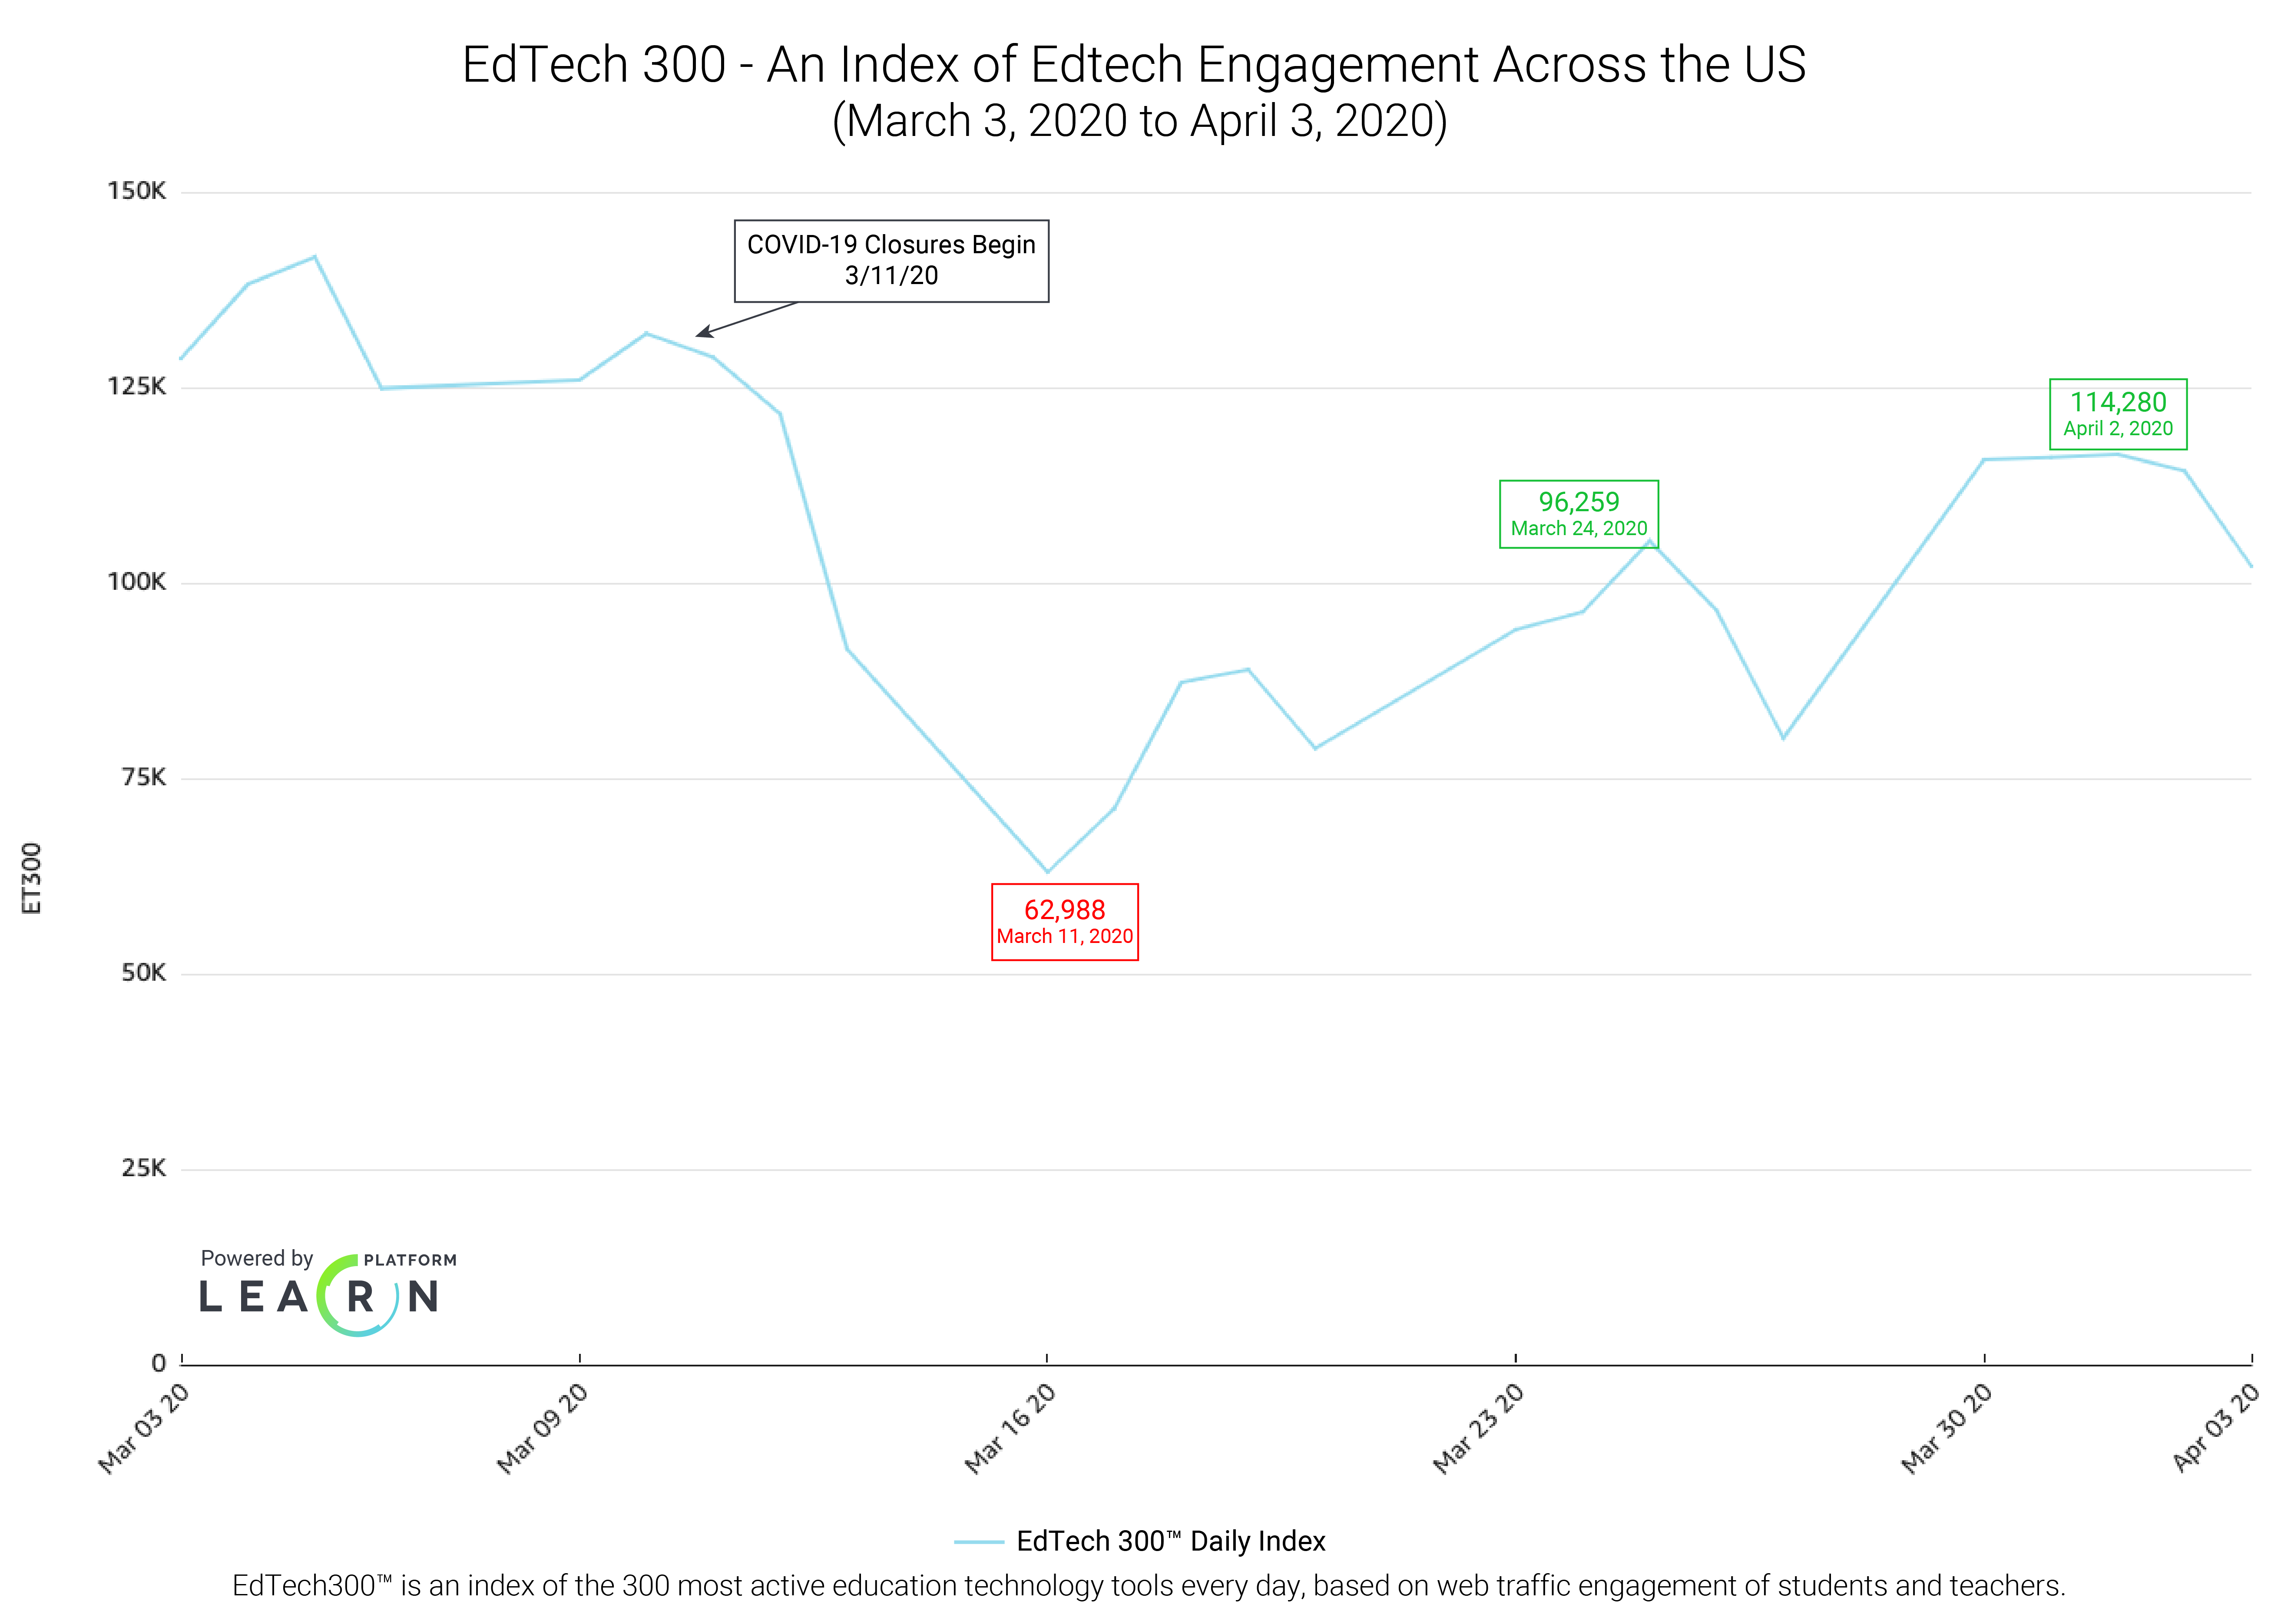 Figure: Index of Edtech Engagement Across the U.S. - March 3, 2020 to April 3, 2020